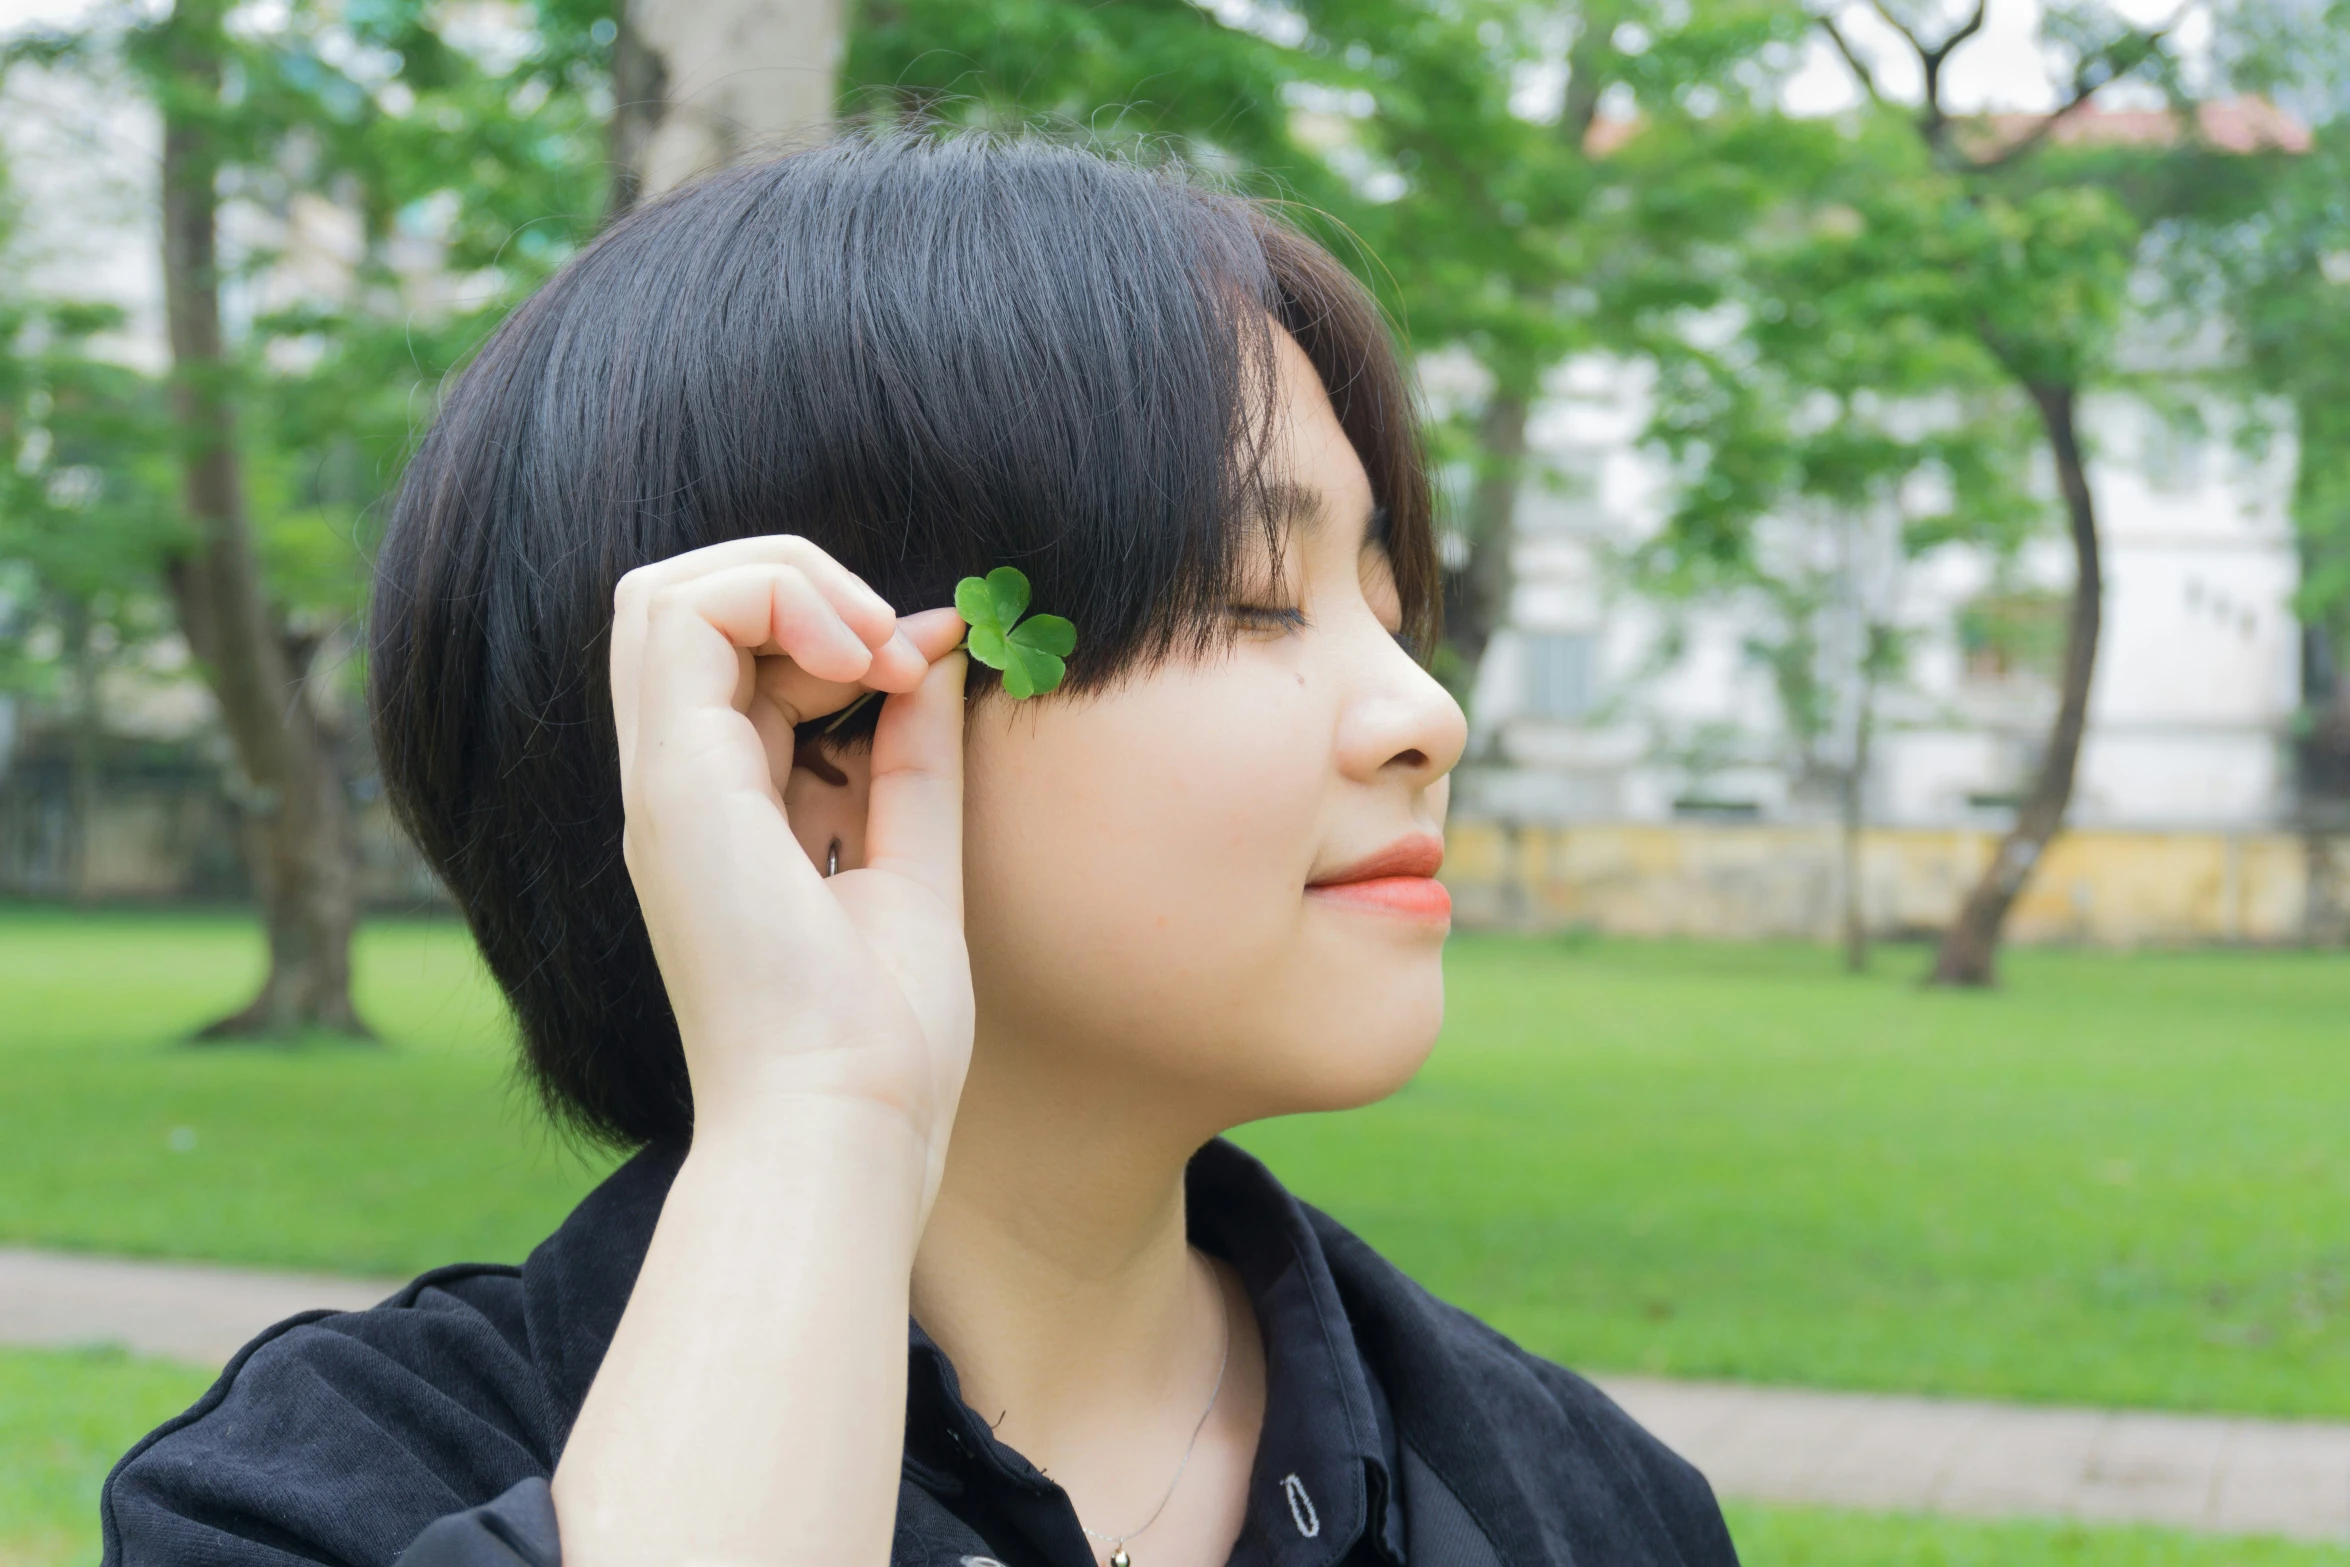 a woman holding a leaf of some sort near her ear